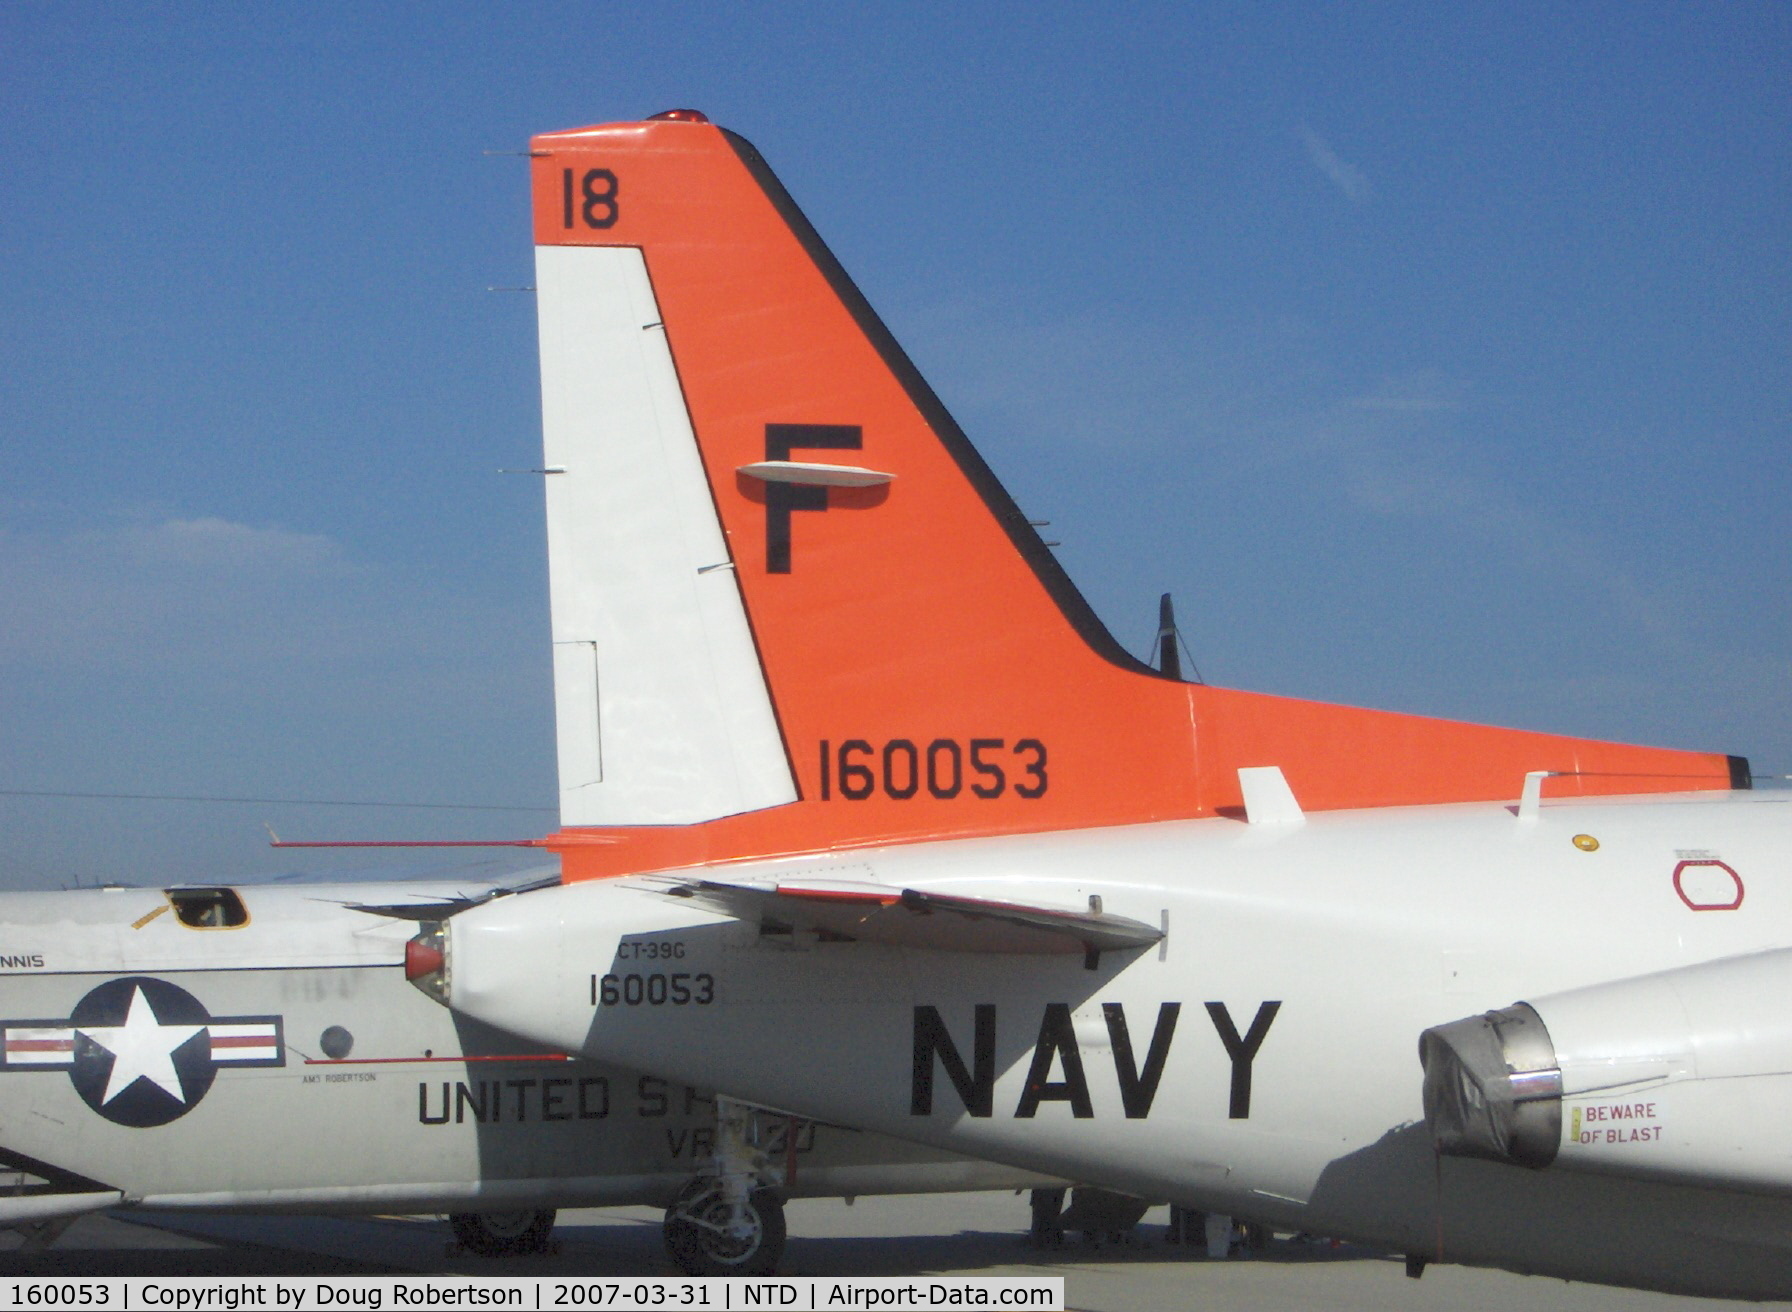 160053, North American Rockwell CT-39G (N-265) Sabreliner C/N 306-104, North American Rockwell CT-39G SABERLINER, two P&W J60 (JT12)-8 3,300 lb st each. Tail data with USN Bureau Number. (Design a bit long in the tooth?)